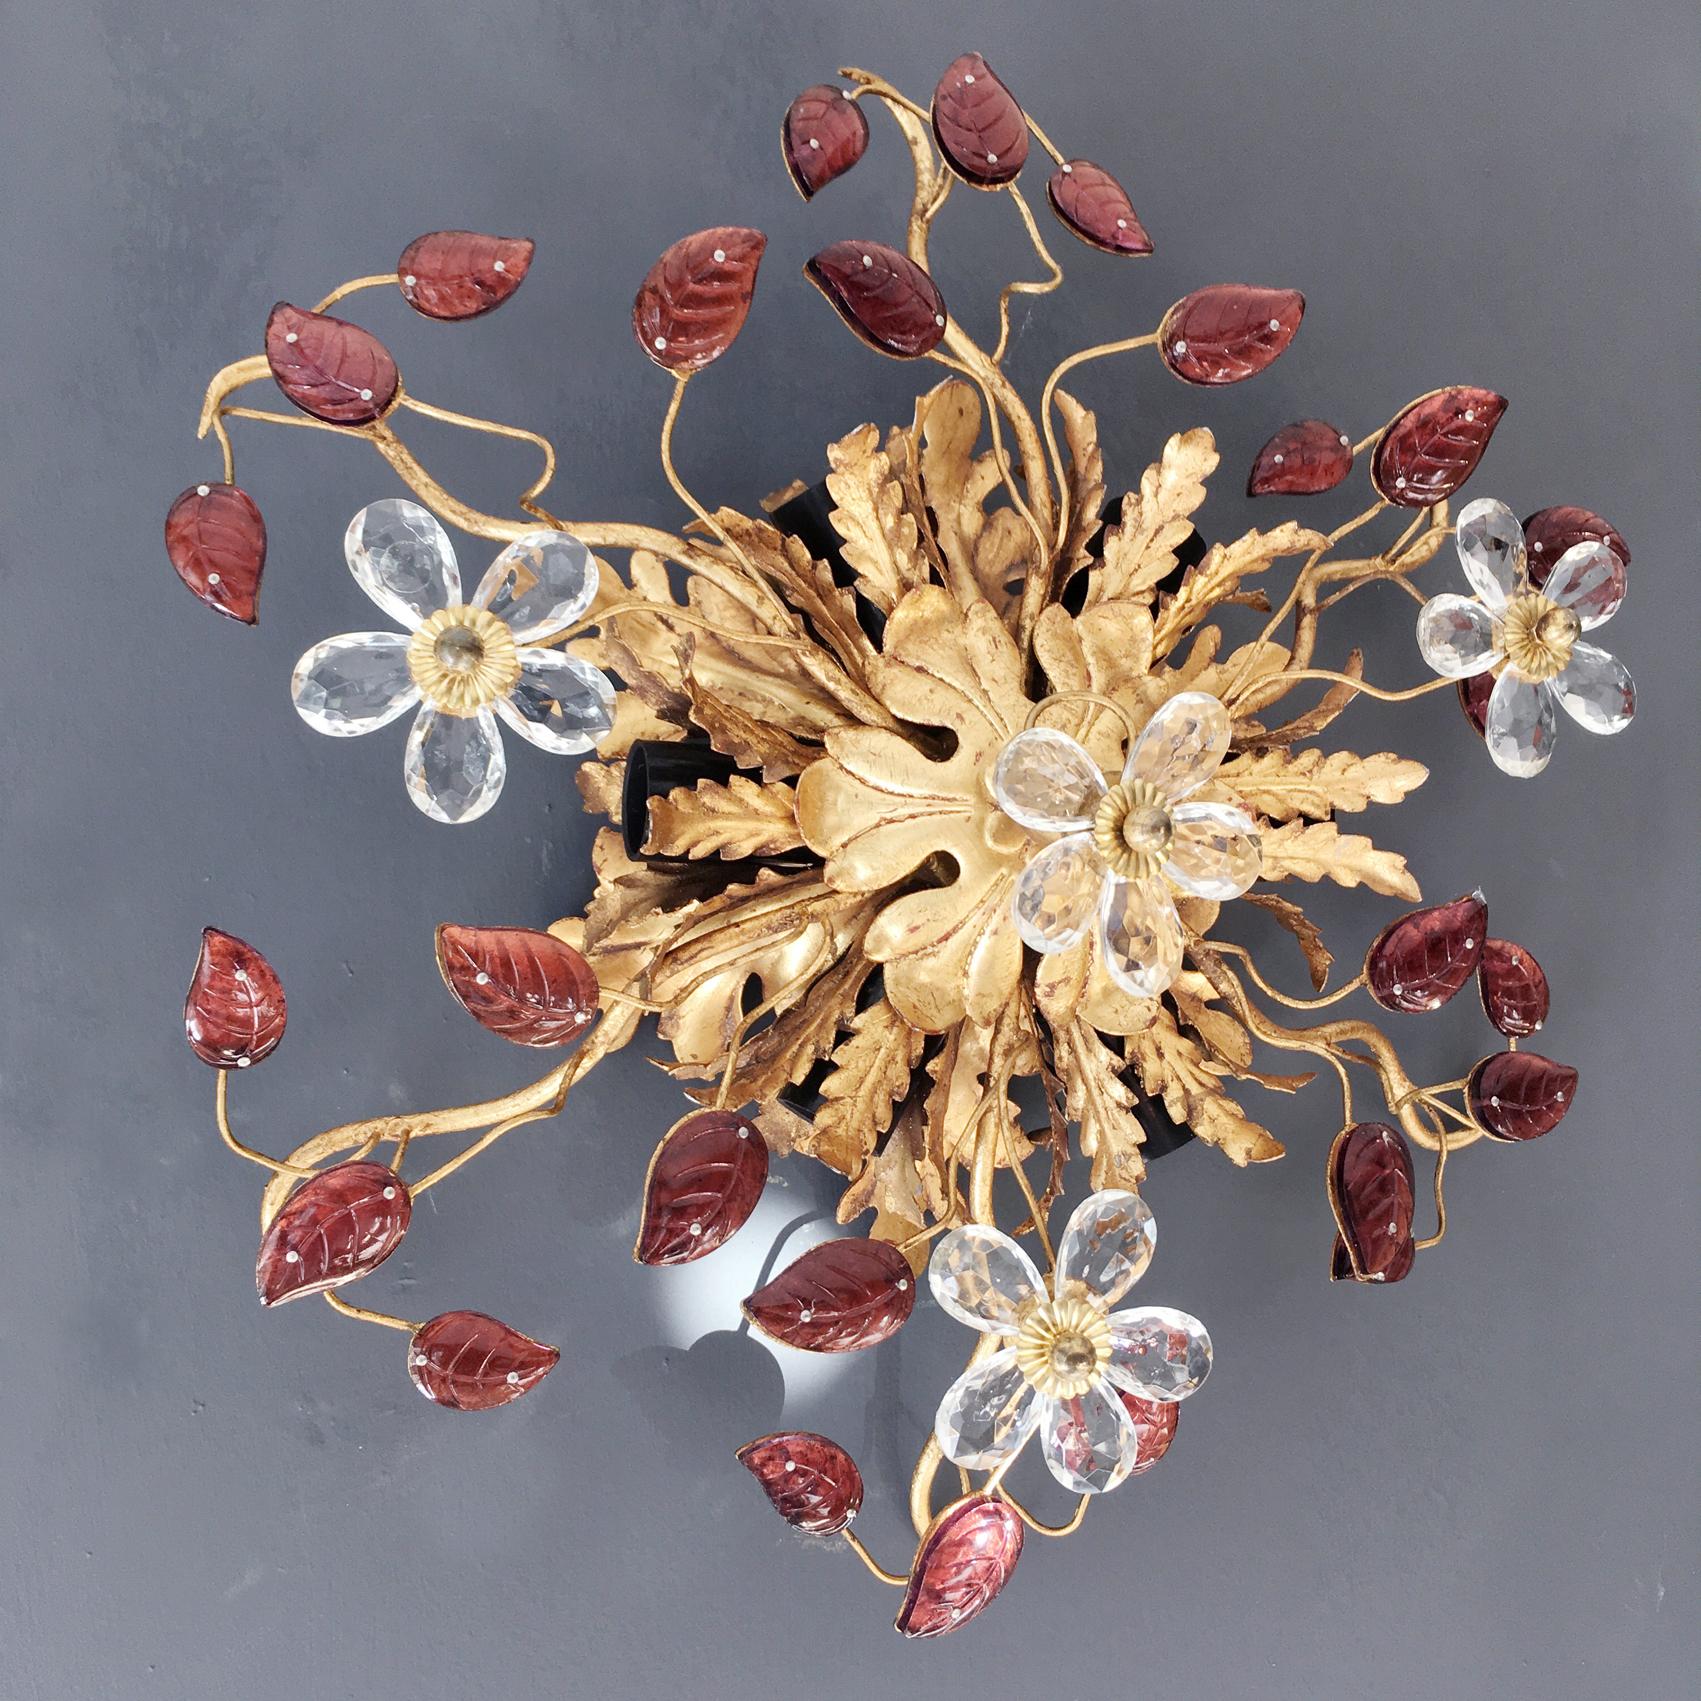 Italian florentine flush mount ceiling light,

Banci Firenze, Italy,

1950s.

Stunning gold acanthus leaf design with clear glass flowers and rose pink/purple glass leaves with gilt stems, Murano glass.

We have added many photos as the